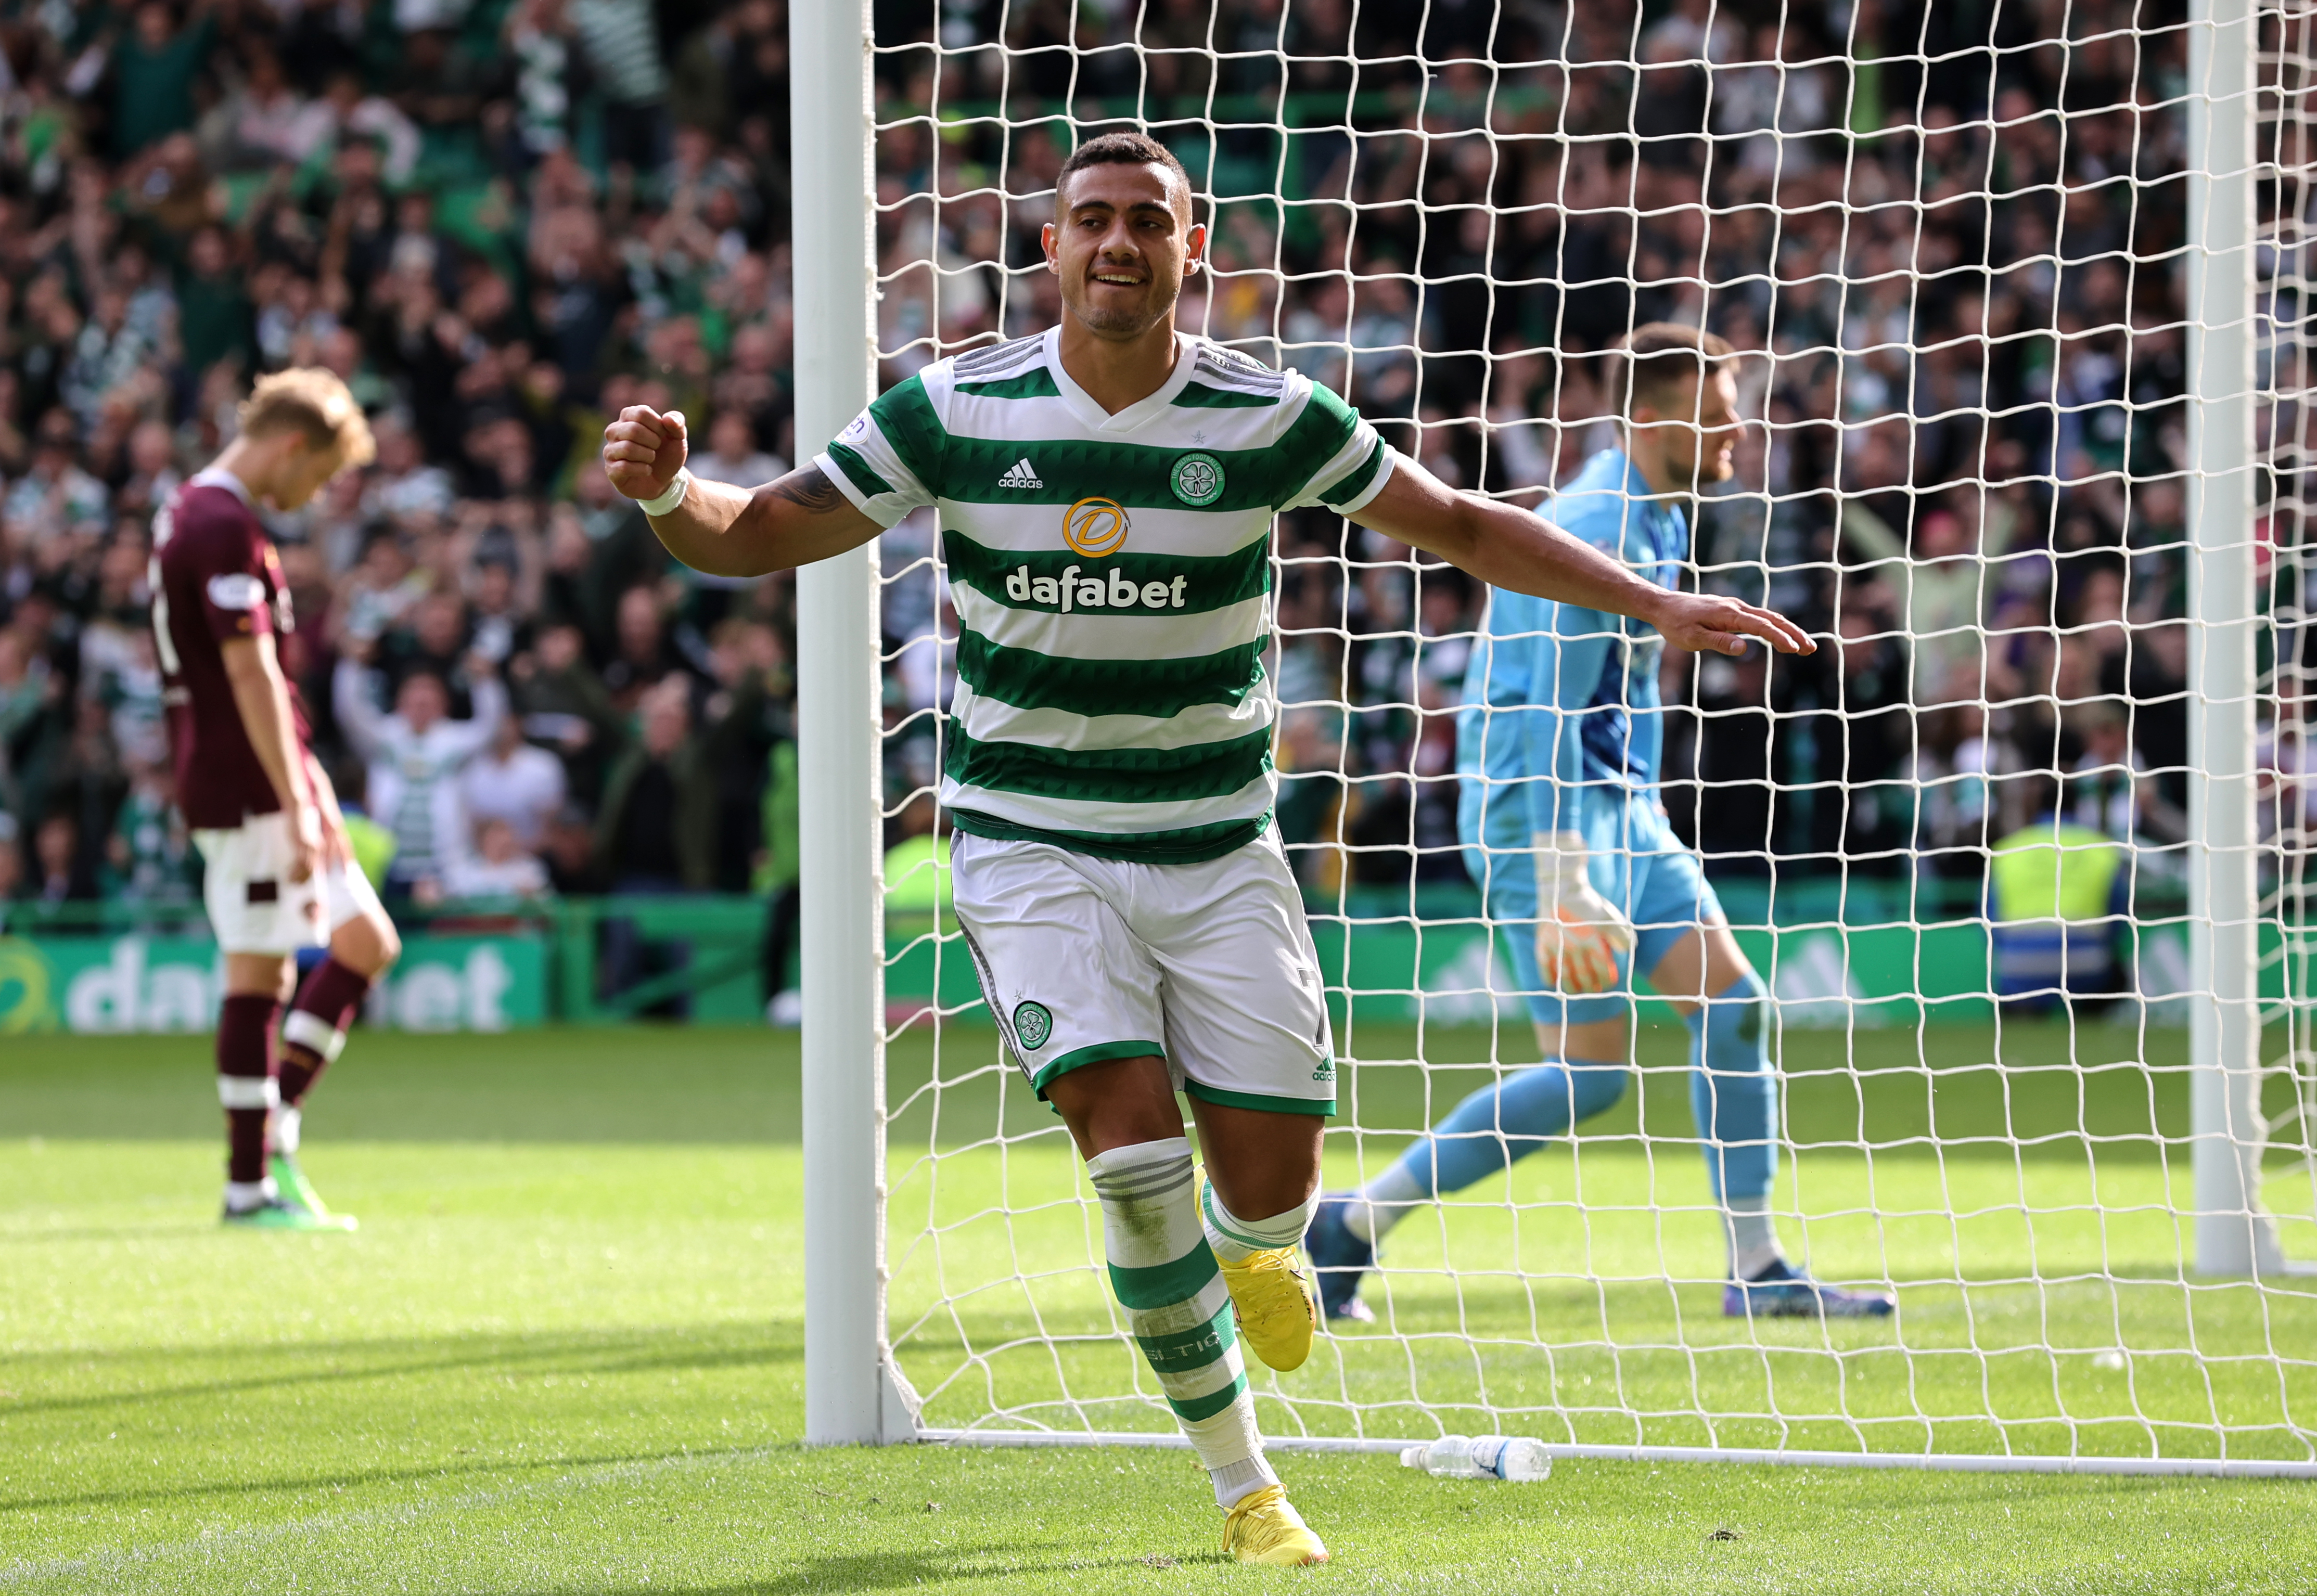 Celtic manager Ange Postecoglou delighted to see both strikers in form FourFourTwo